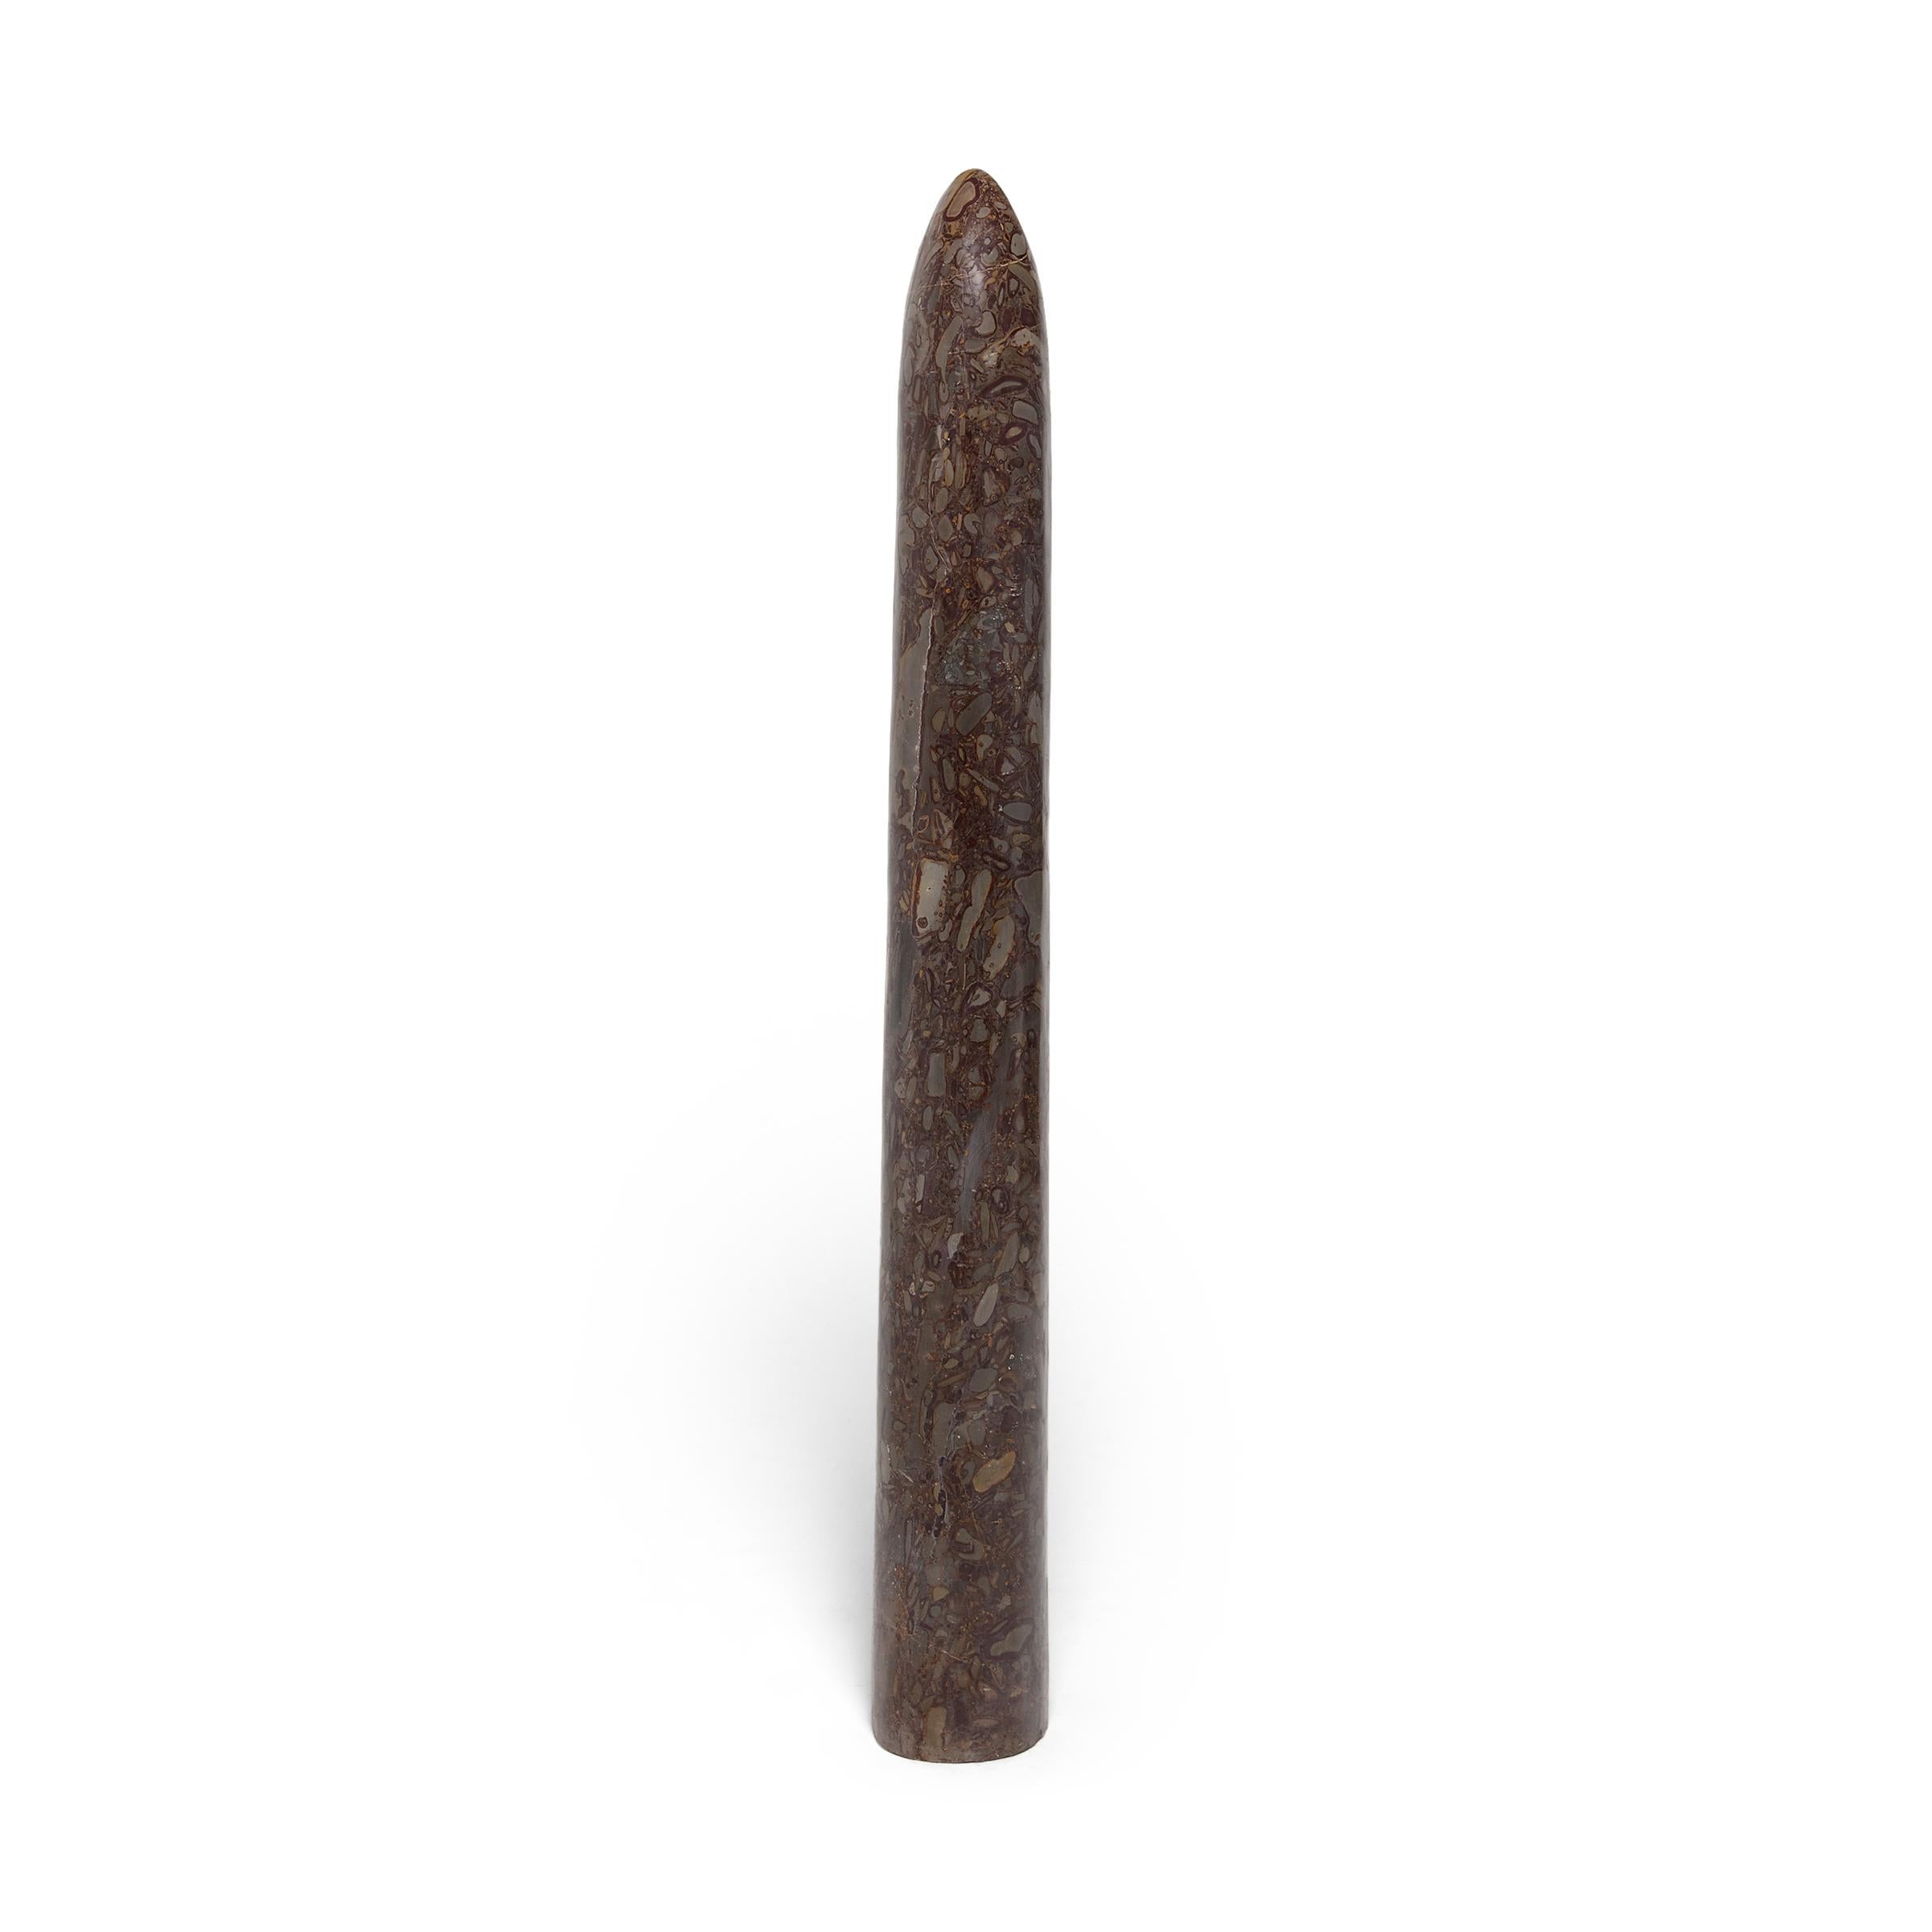 Carved from a single block of puddingstone, this stone obelisk makes for a striking addition to a garden or interior as a minimalist modern sculpture. Though it looks like a meticulous painting, the mesmerizing pattern of puddingstone is actually